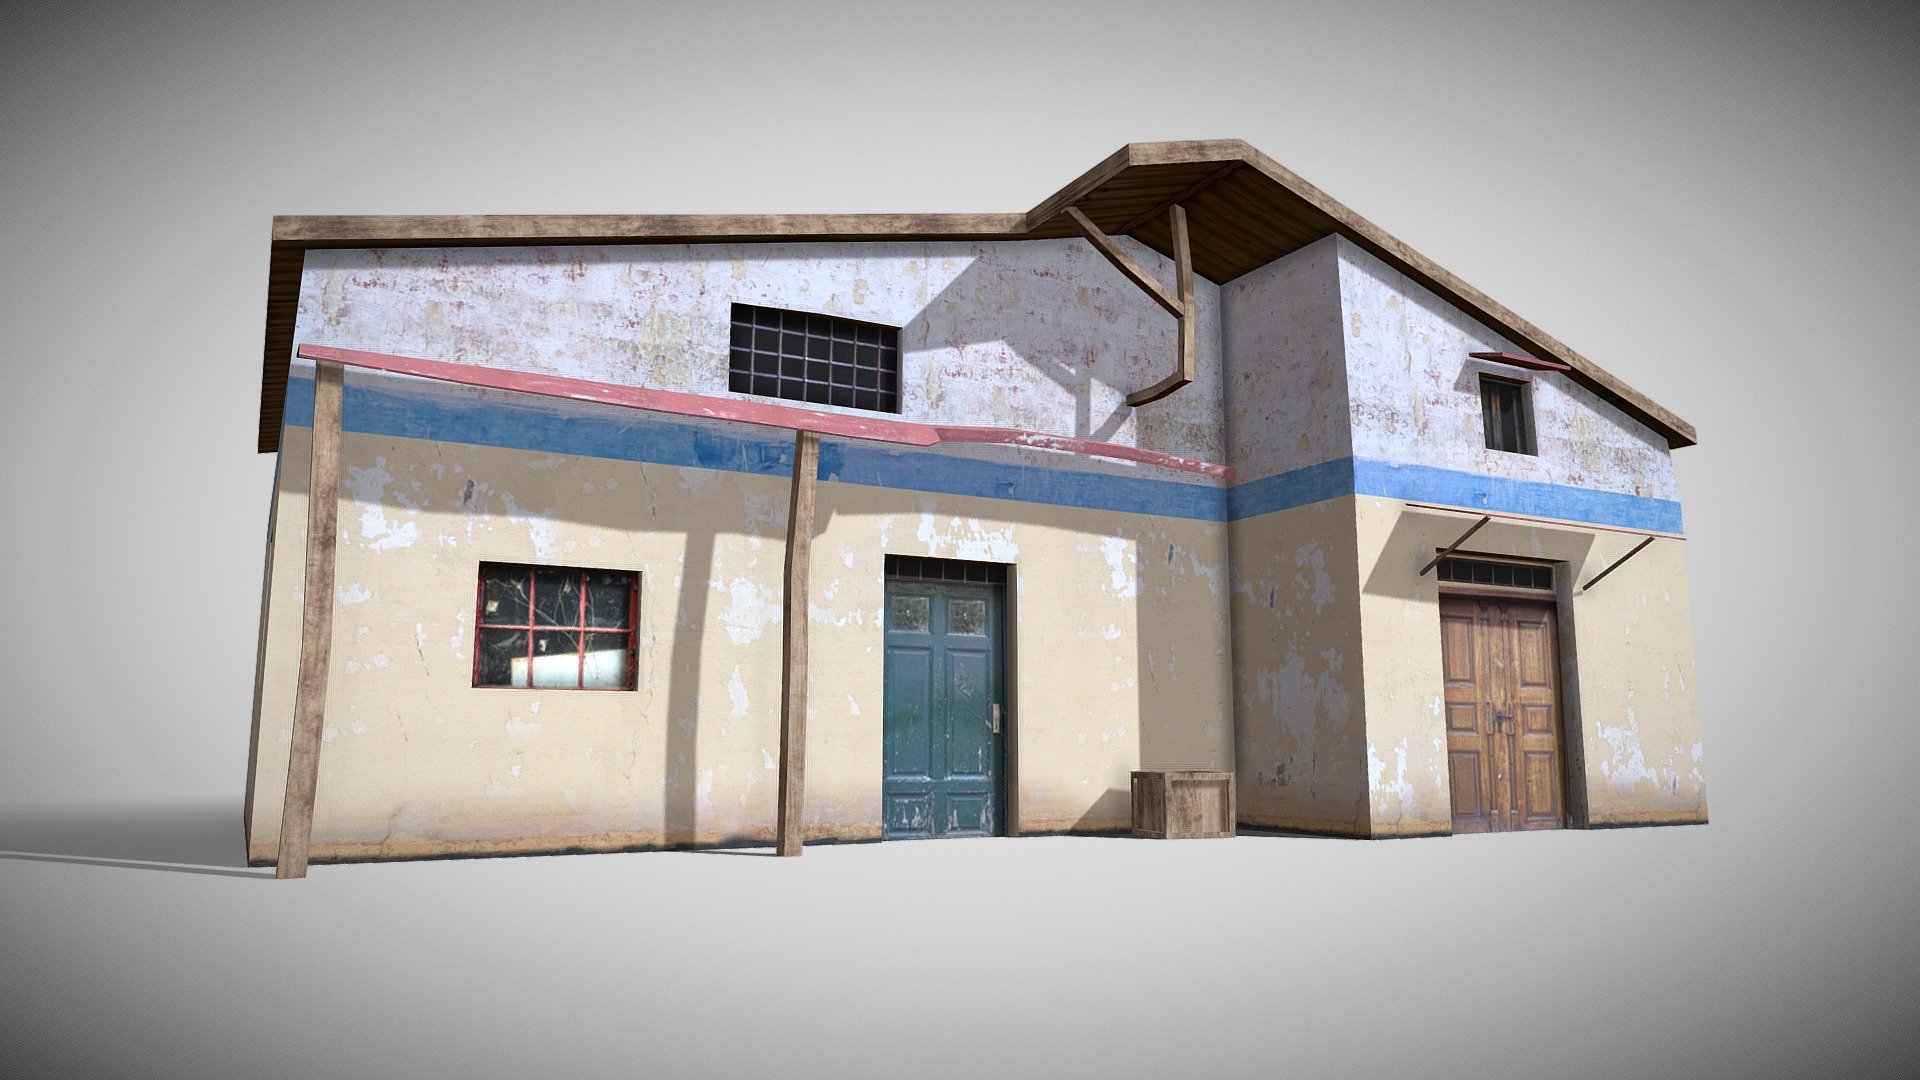 Game Ready 3D Old House /slum Native file format 3Ds max 2022 Other formats Blender 4.0 ,FBX, OBJ, All formats include materials &amp; textures

Polygons- 544   Vertices-610

Materials &amp; textures. 1 Diffuse Map 2048x2048 - Slum X17 - Buy Royalty Free 3D model by 3DRK (@3DRK98) 3d model